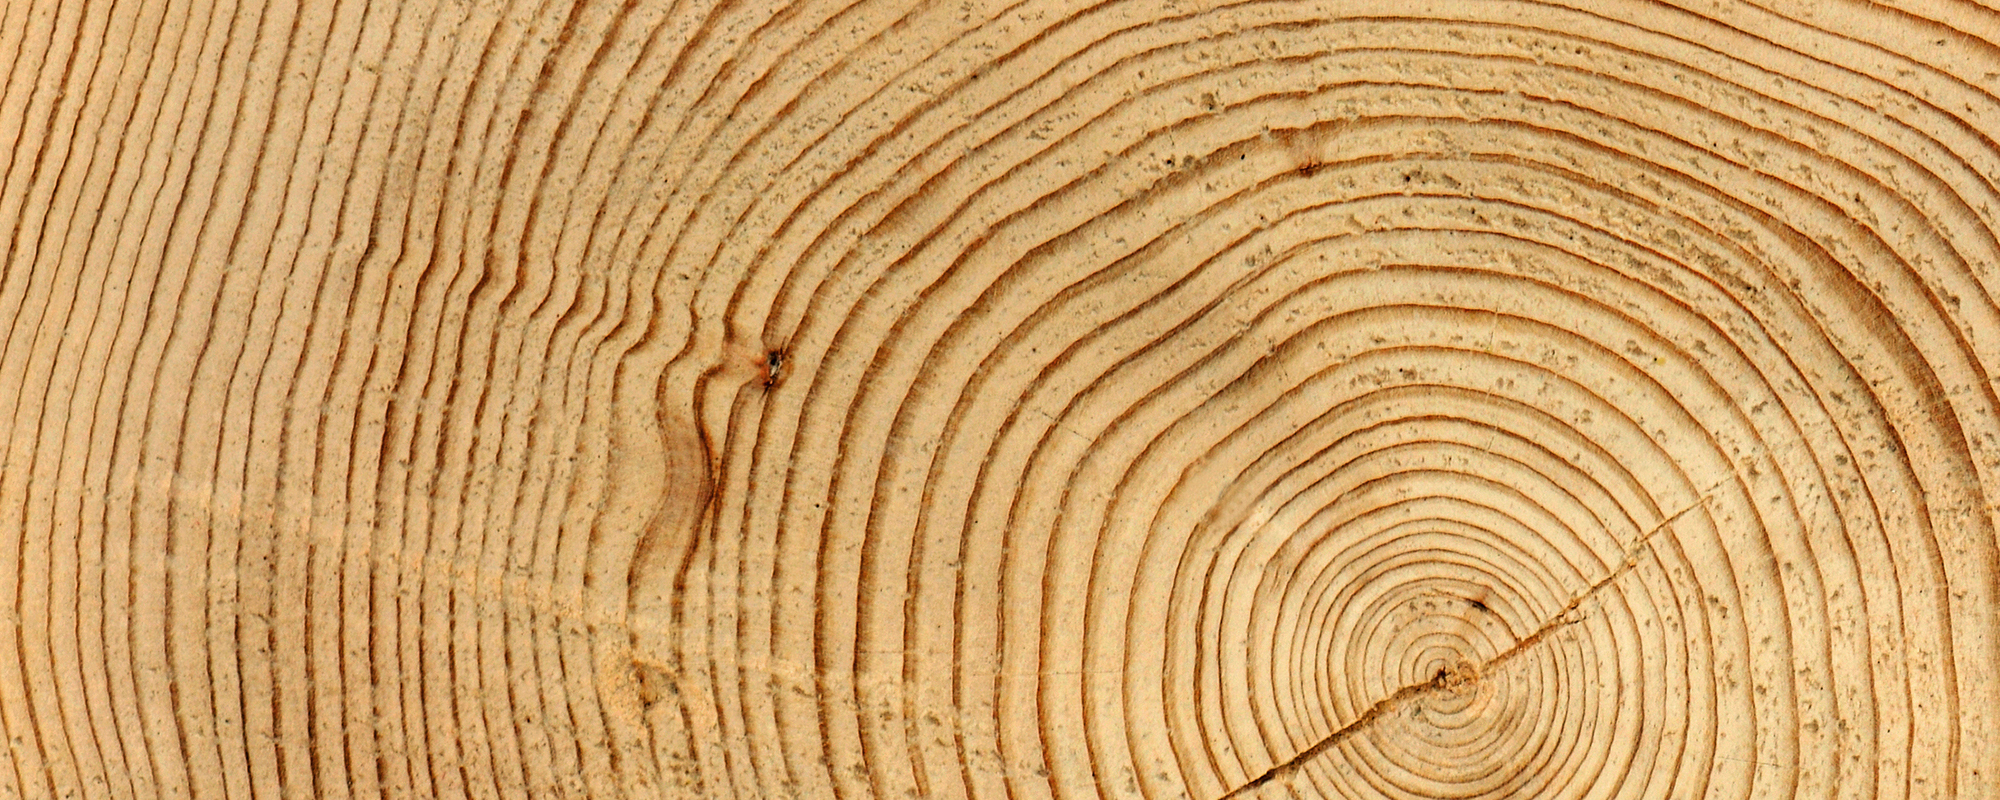 An abstract image of wood.